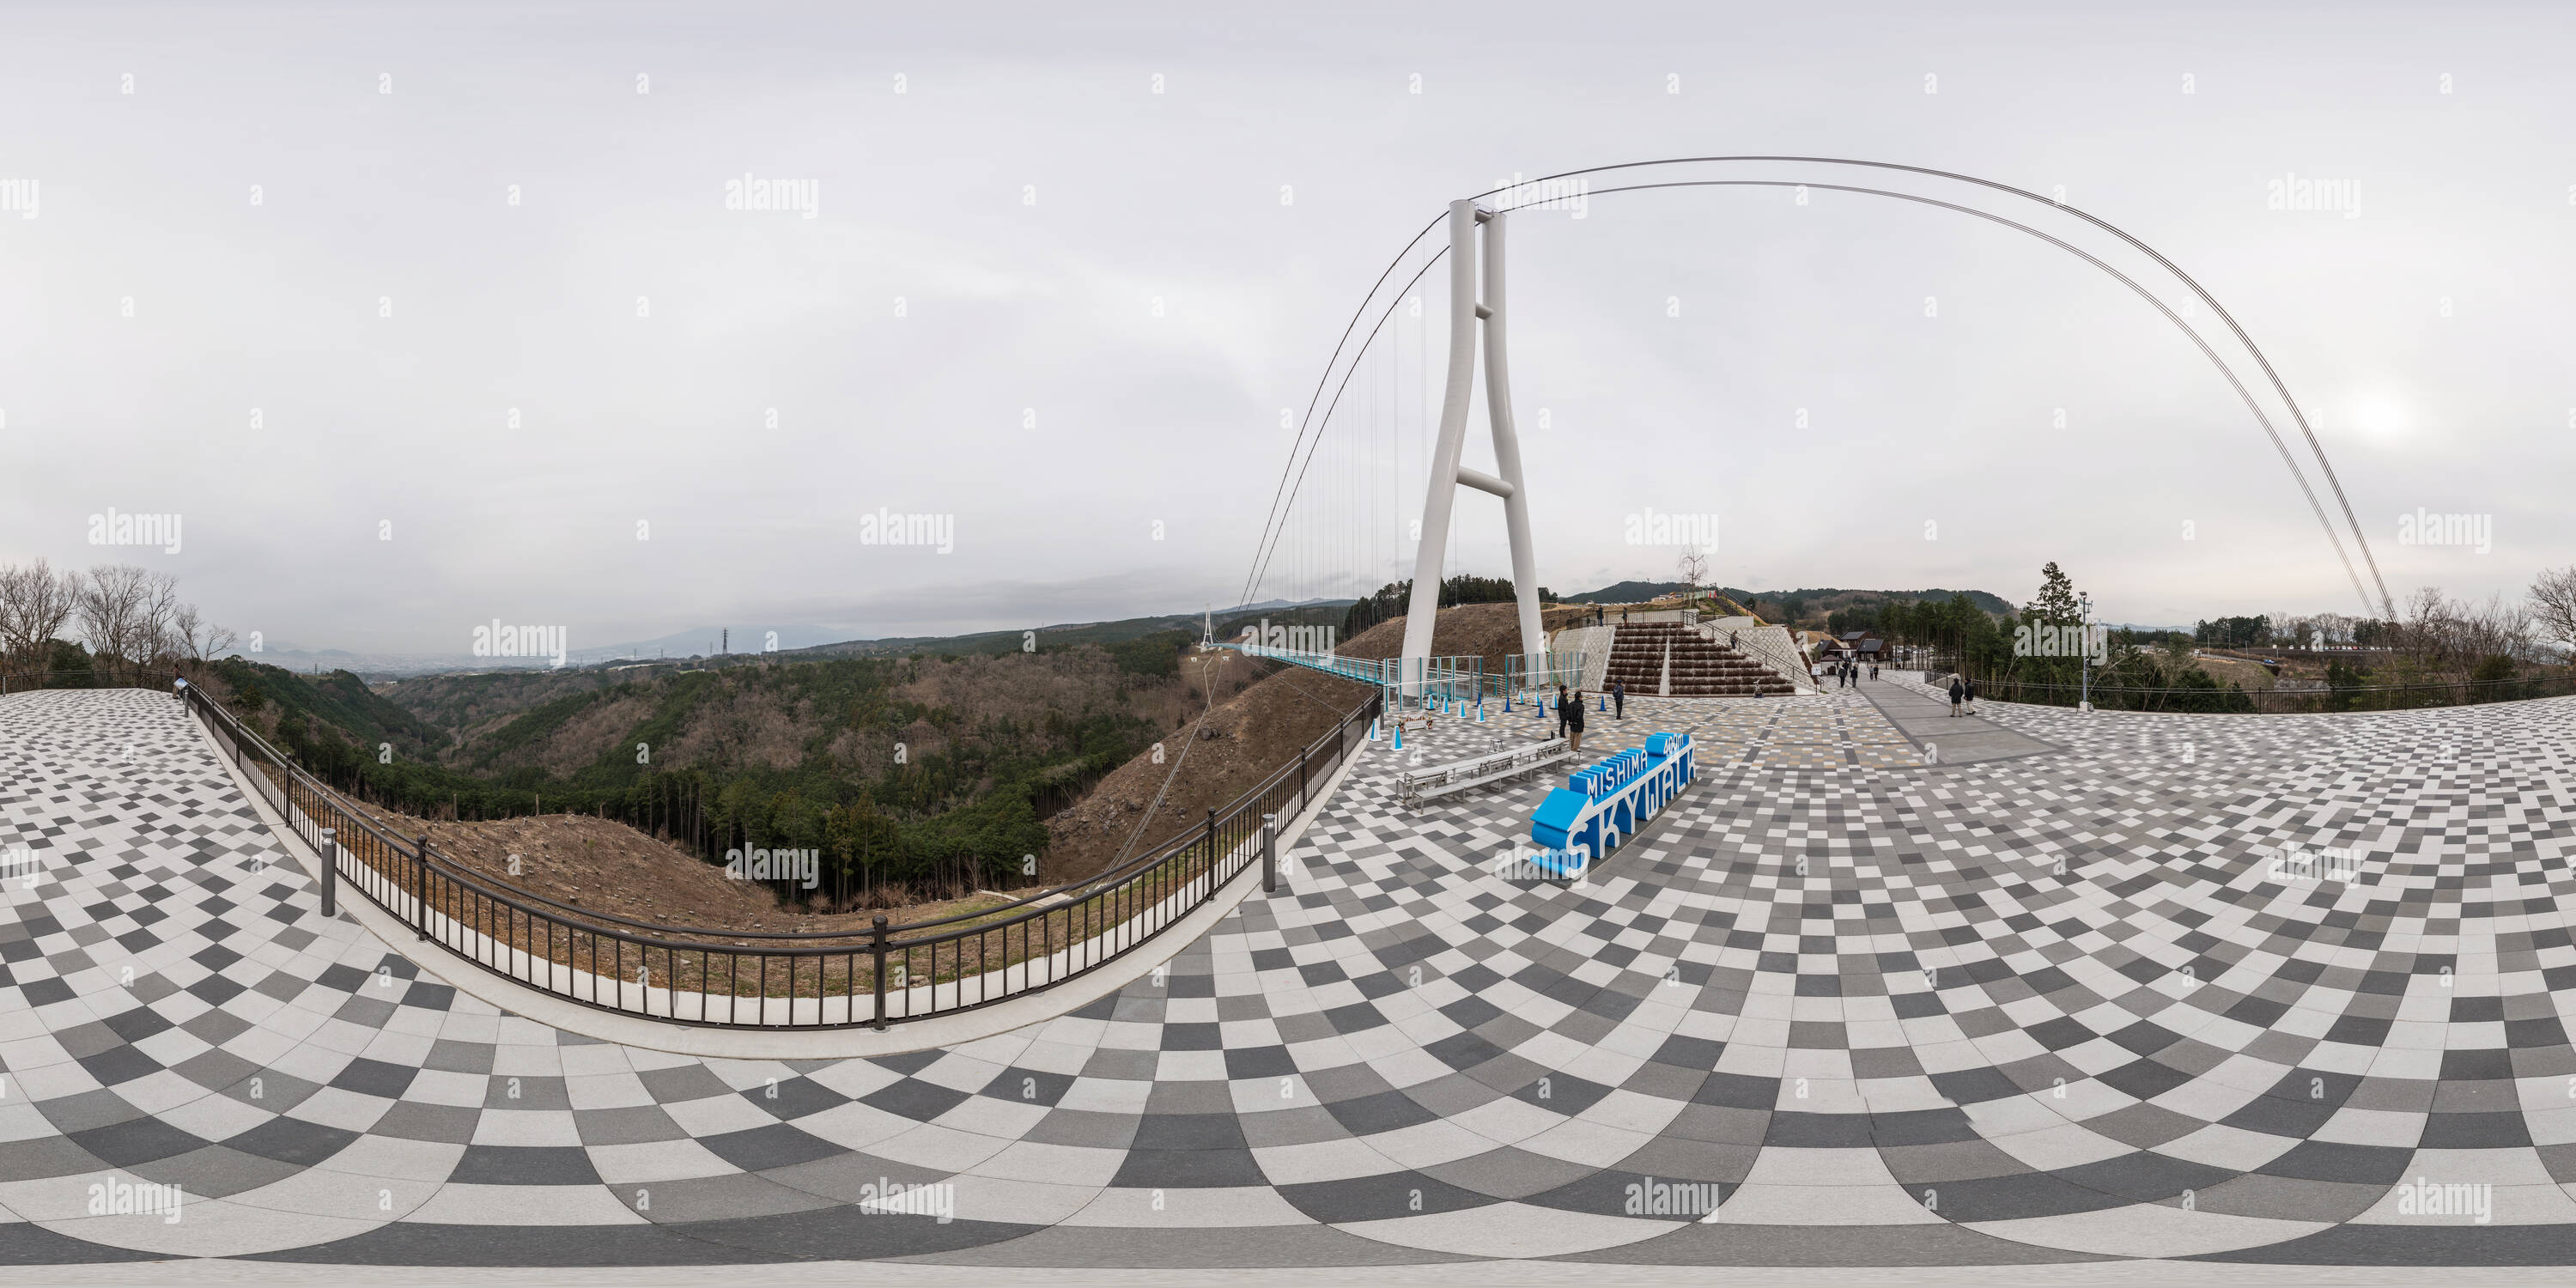 360 degree panoramic view of Mishim SKYWALK south end